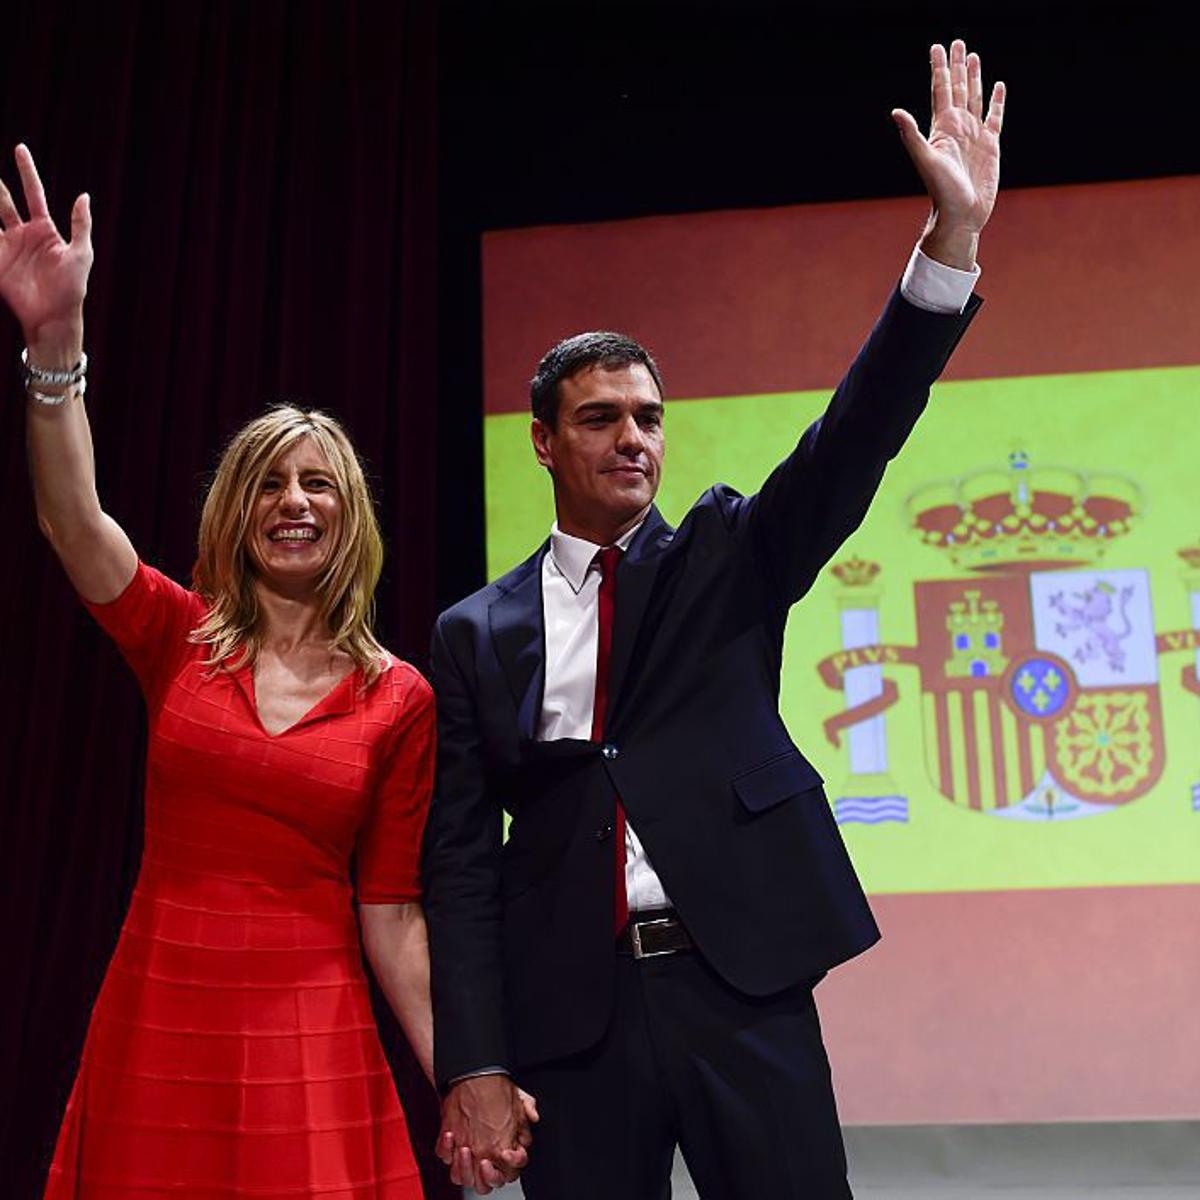 Spanish PM and his wife Begona